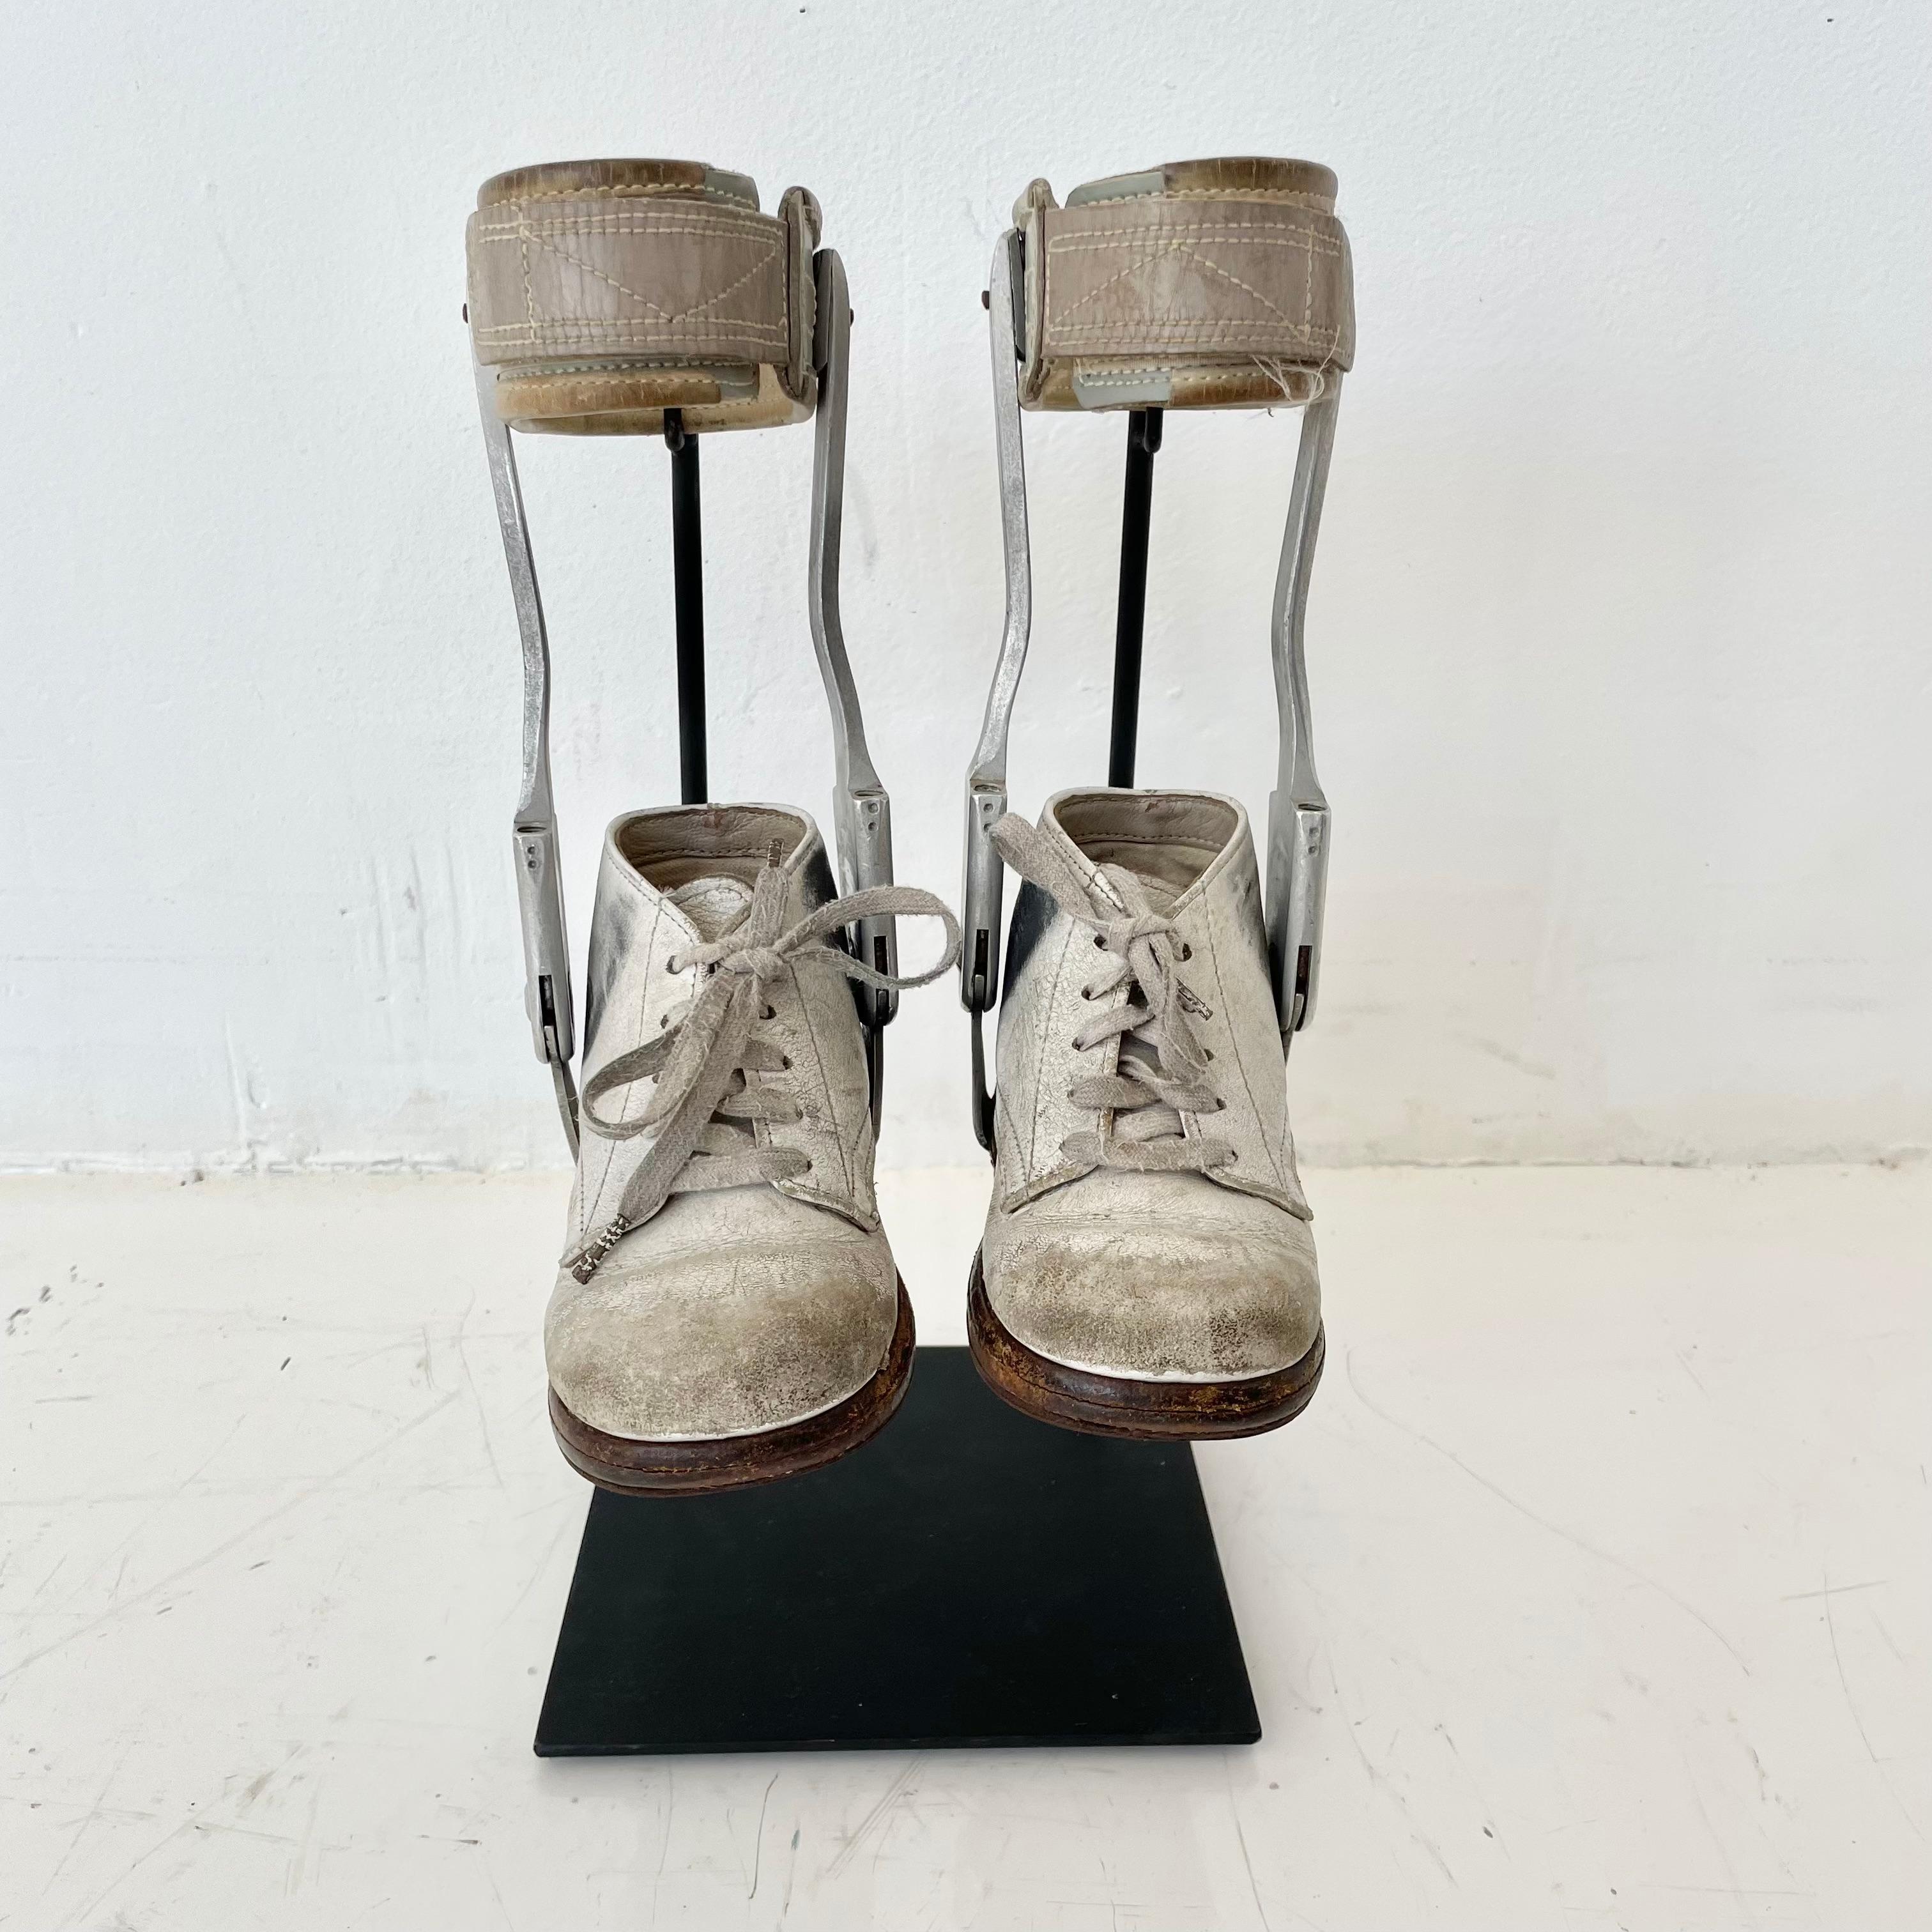 Made in the 1940s, these vintage children's leg braces are an interesting piece of medical history. Fitted for Polio patients. The leg brace is made from chrome plated steel braces and orthopedic leather. Custom iron stands that display them nicely.